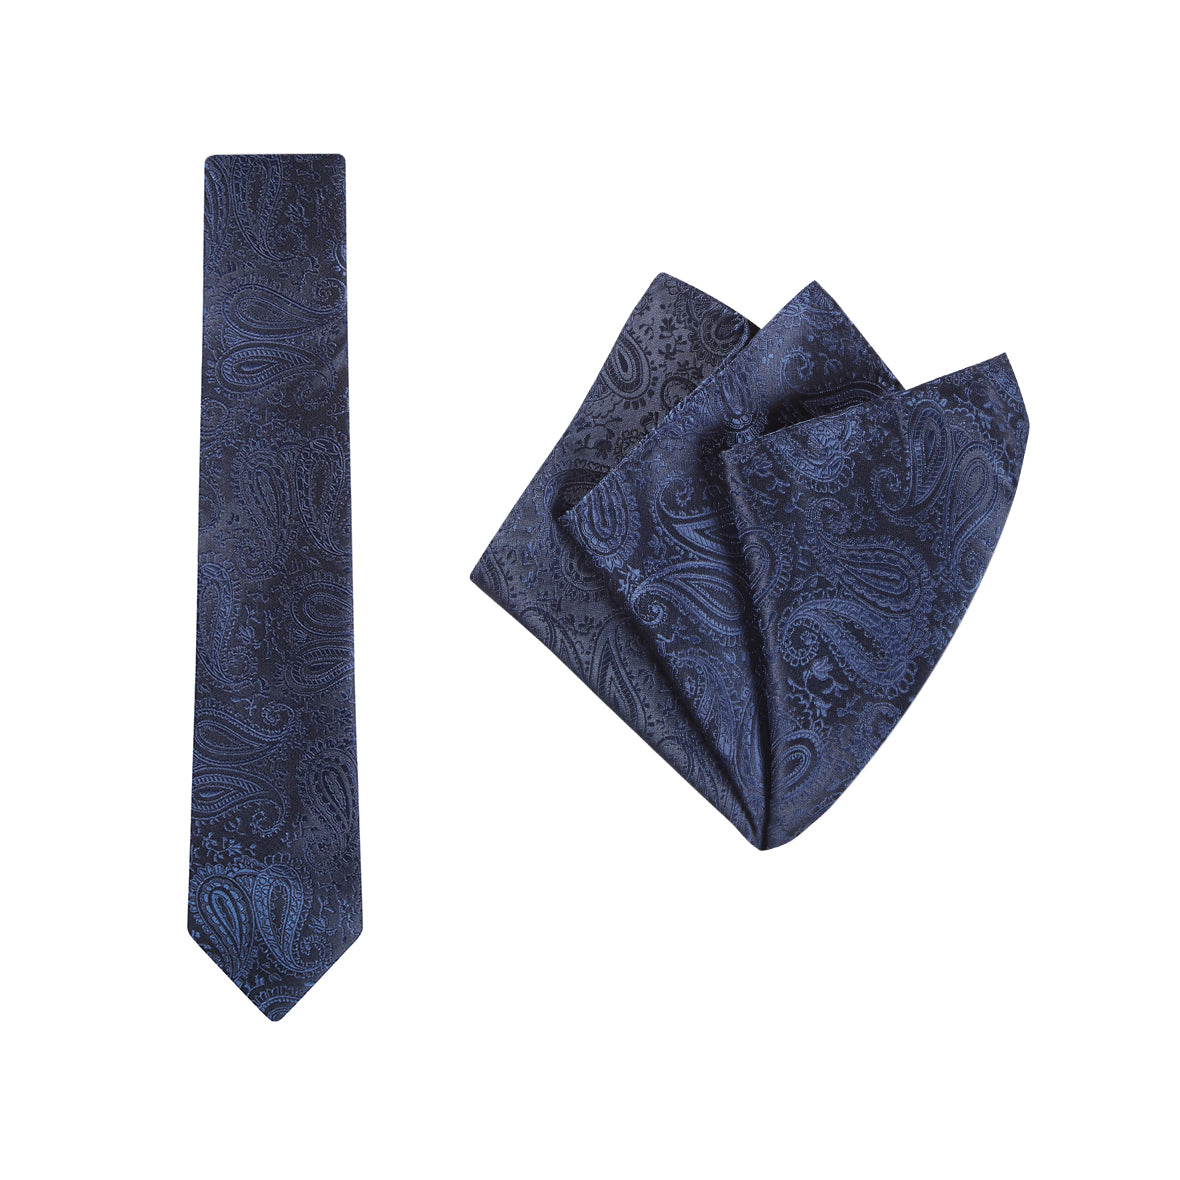 TIE + POCKET SQUARE SET. Paisley. Navy. Supplied with matching pocket square.-Ties-PEROZ Accessories